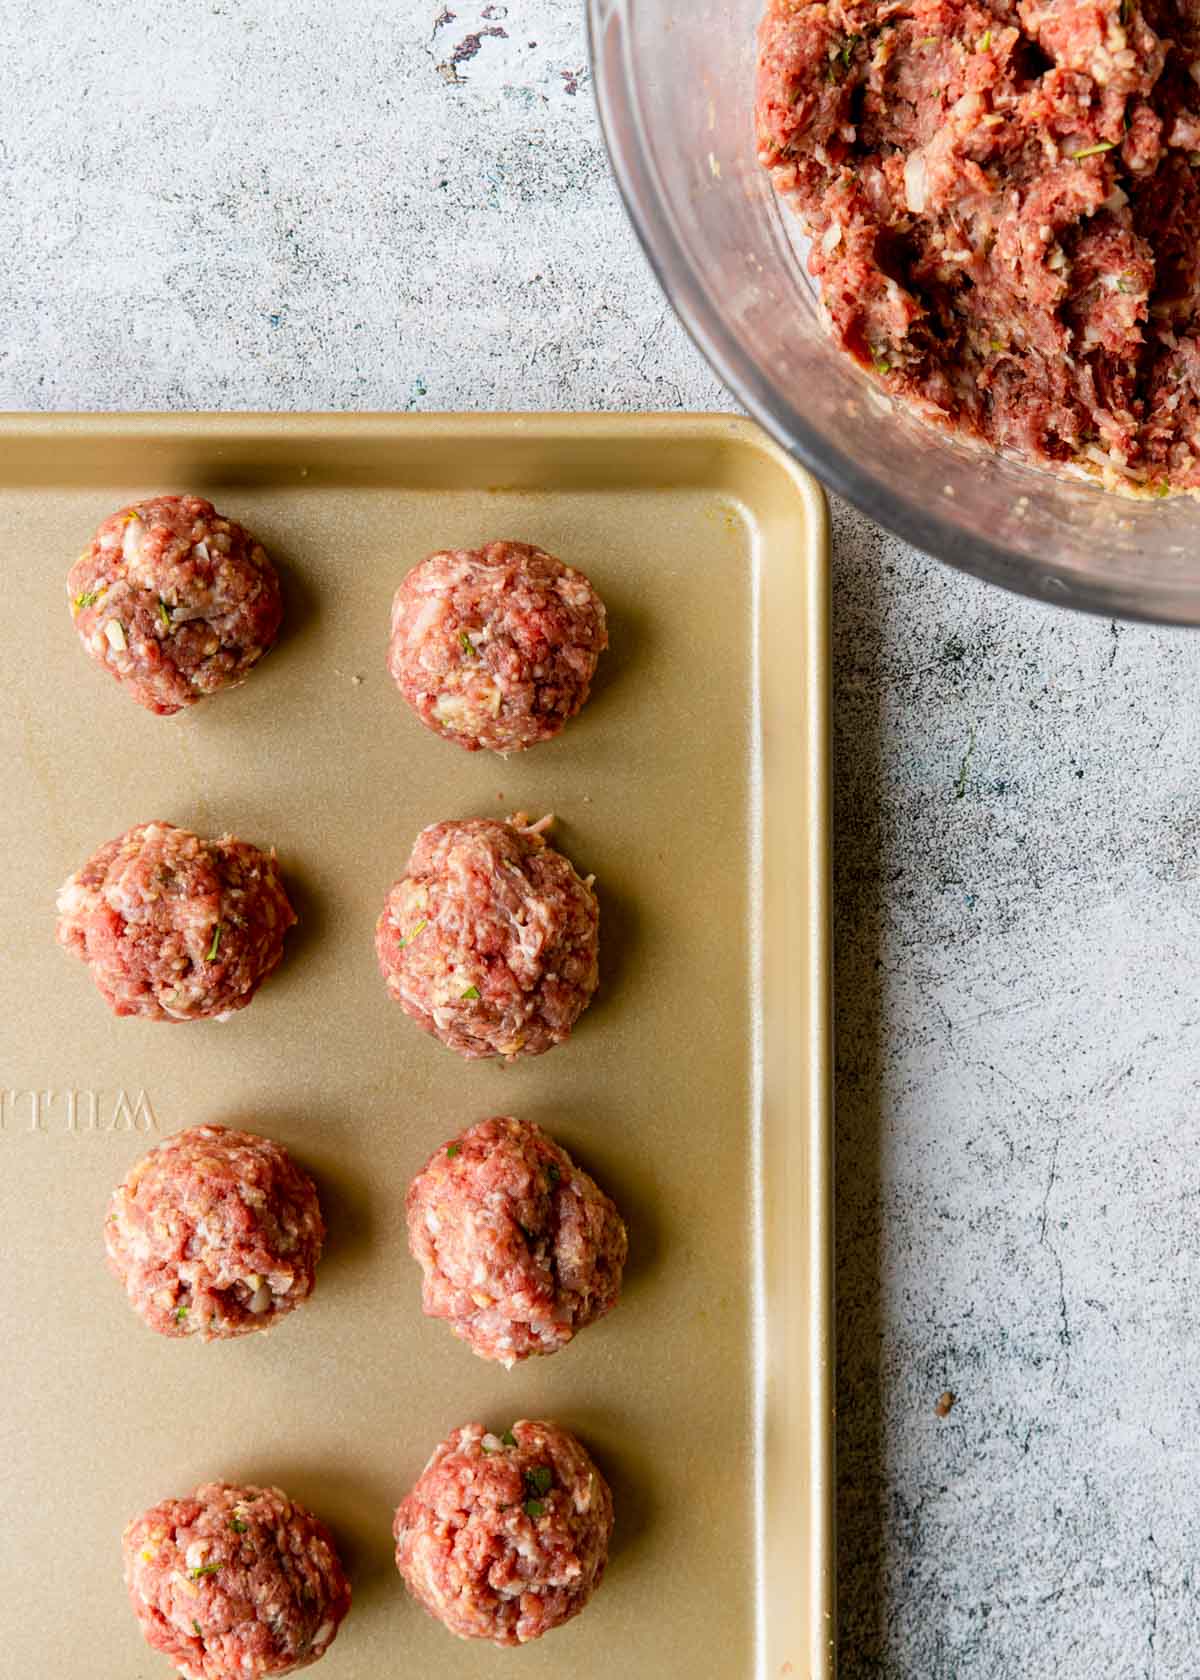 showing meatballs on a baking sheet to show the size, about like a ping pong ball